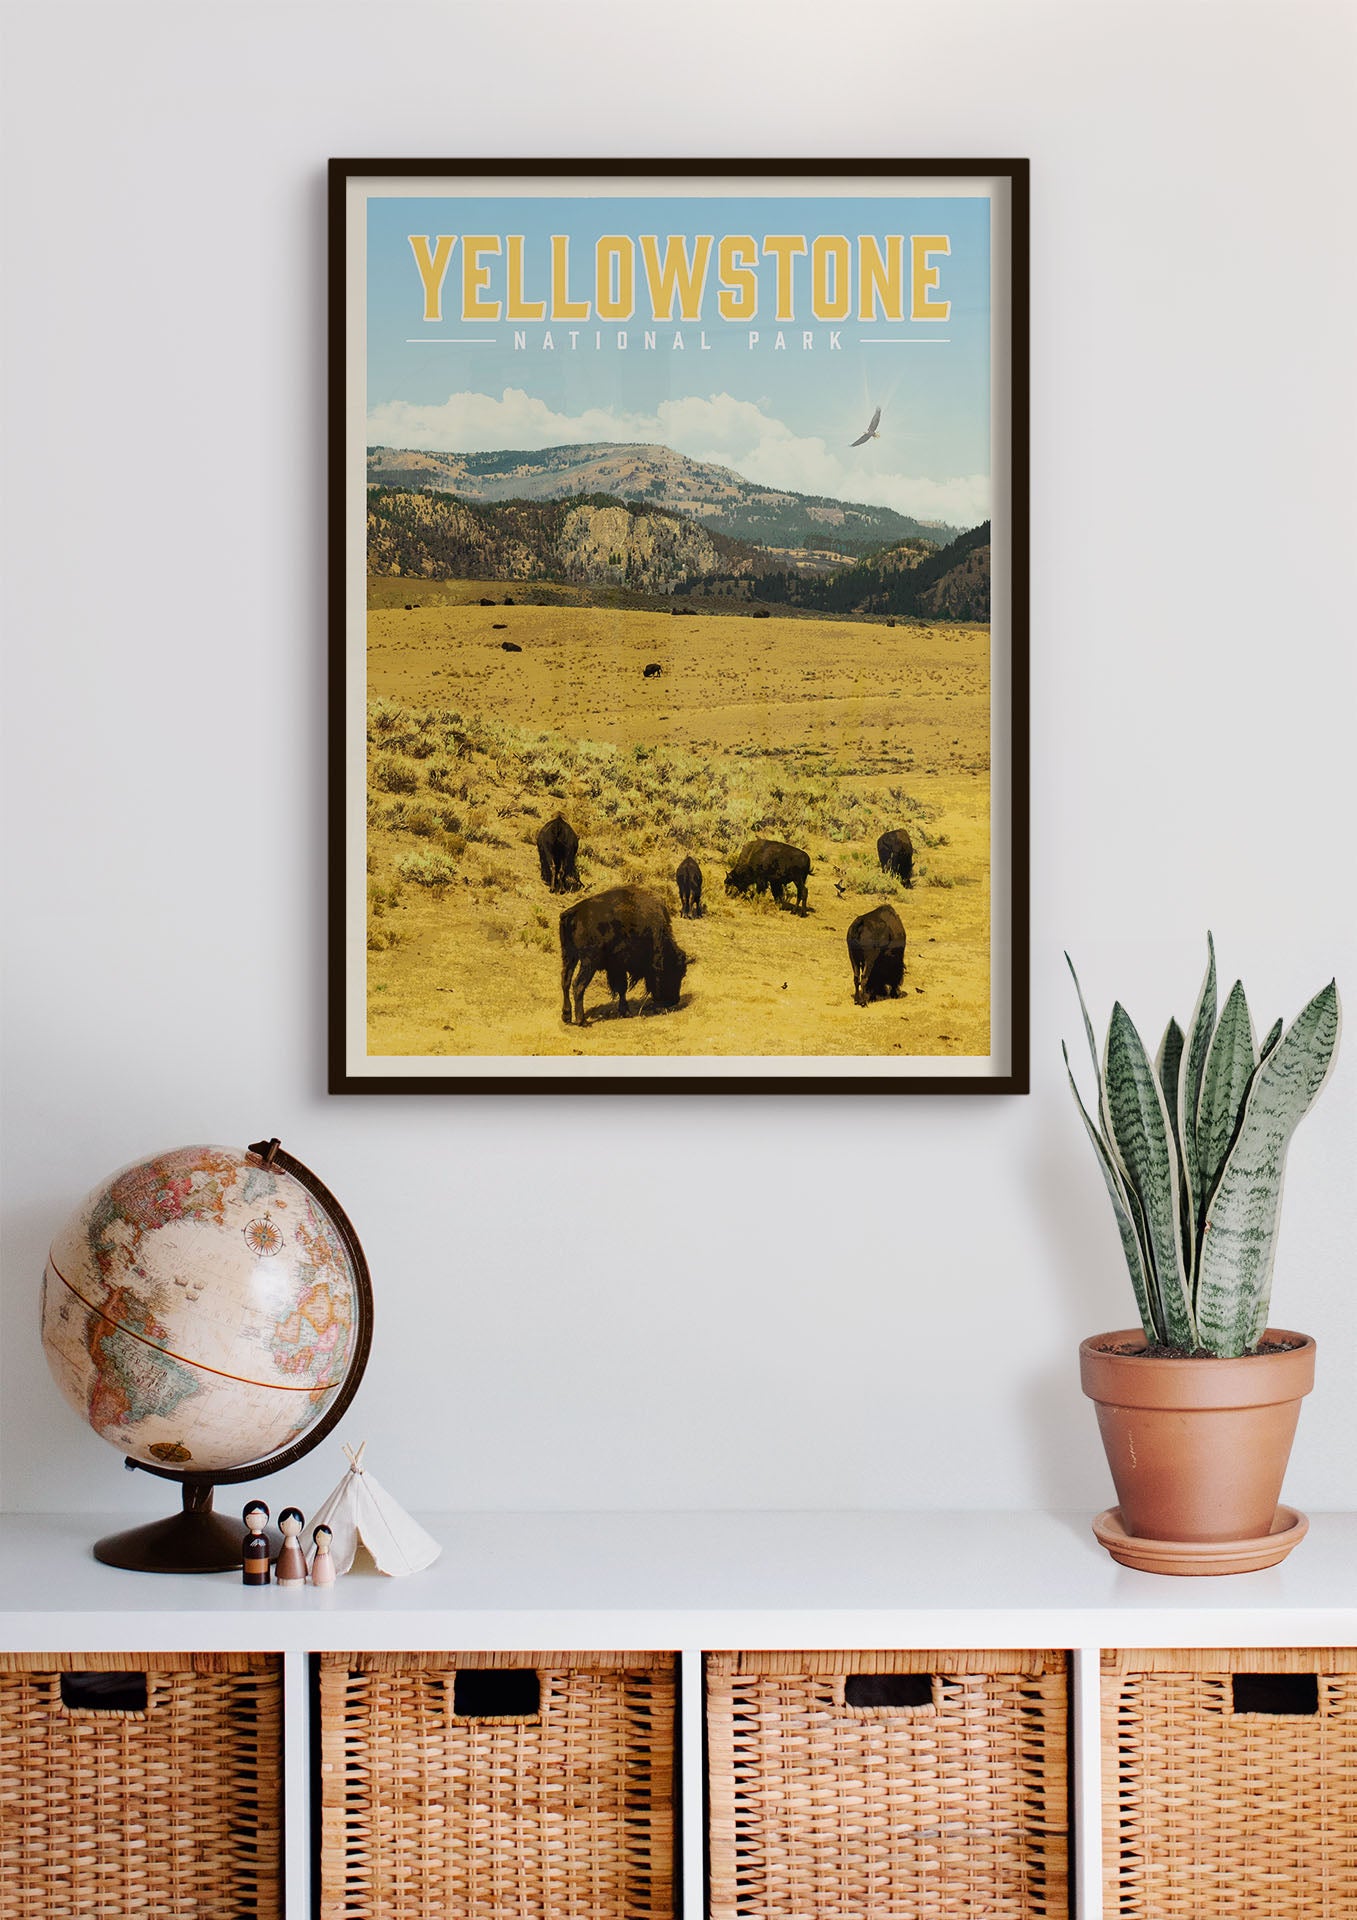 Yellowstone Vintage National Park Poster